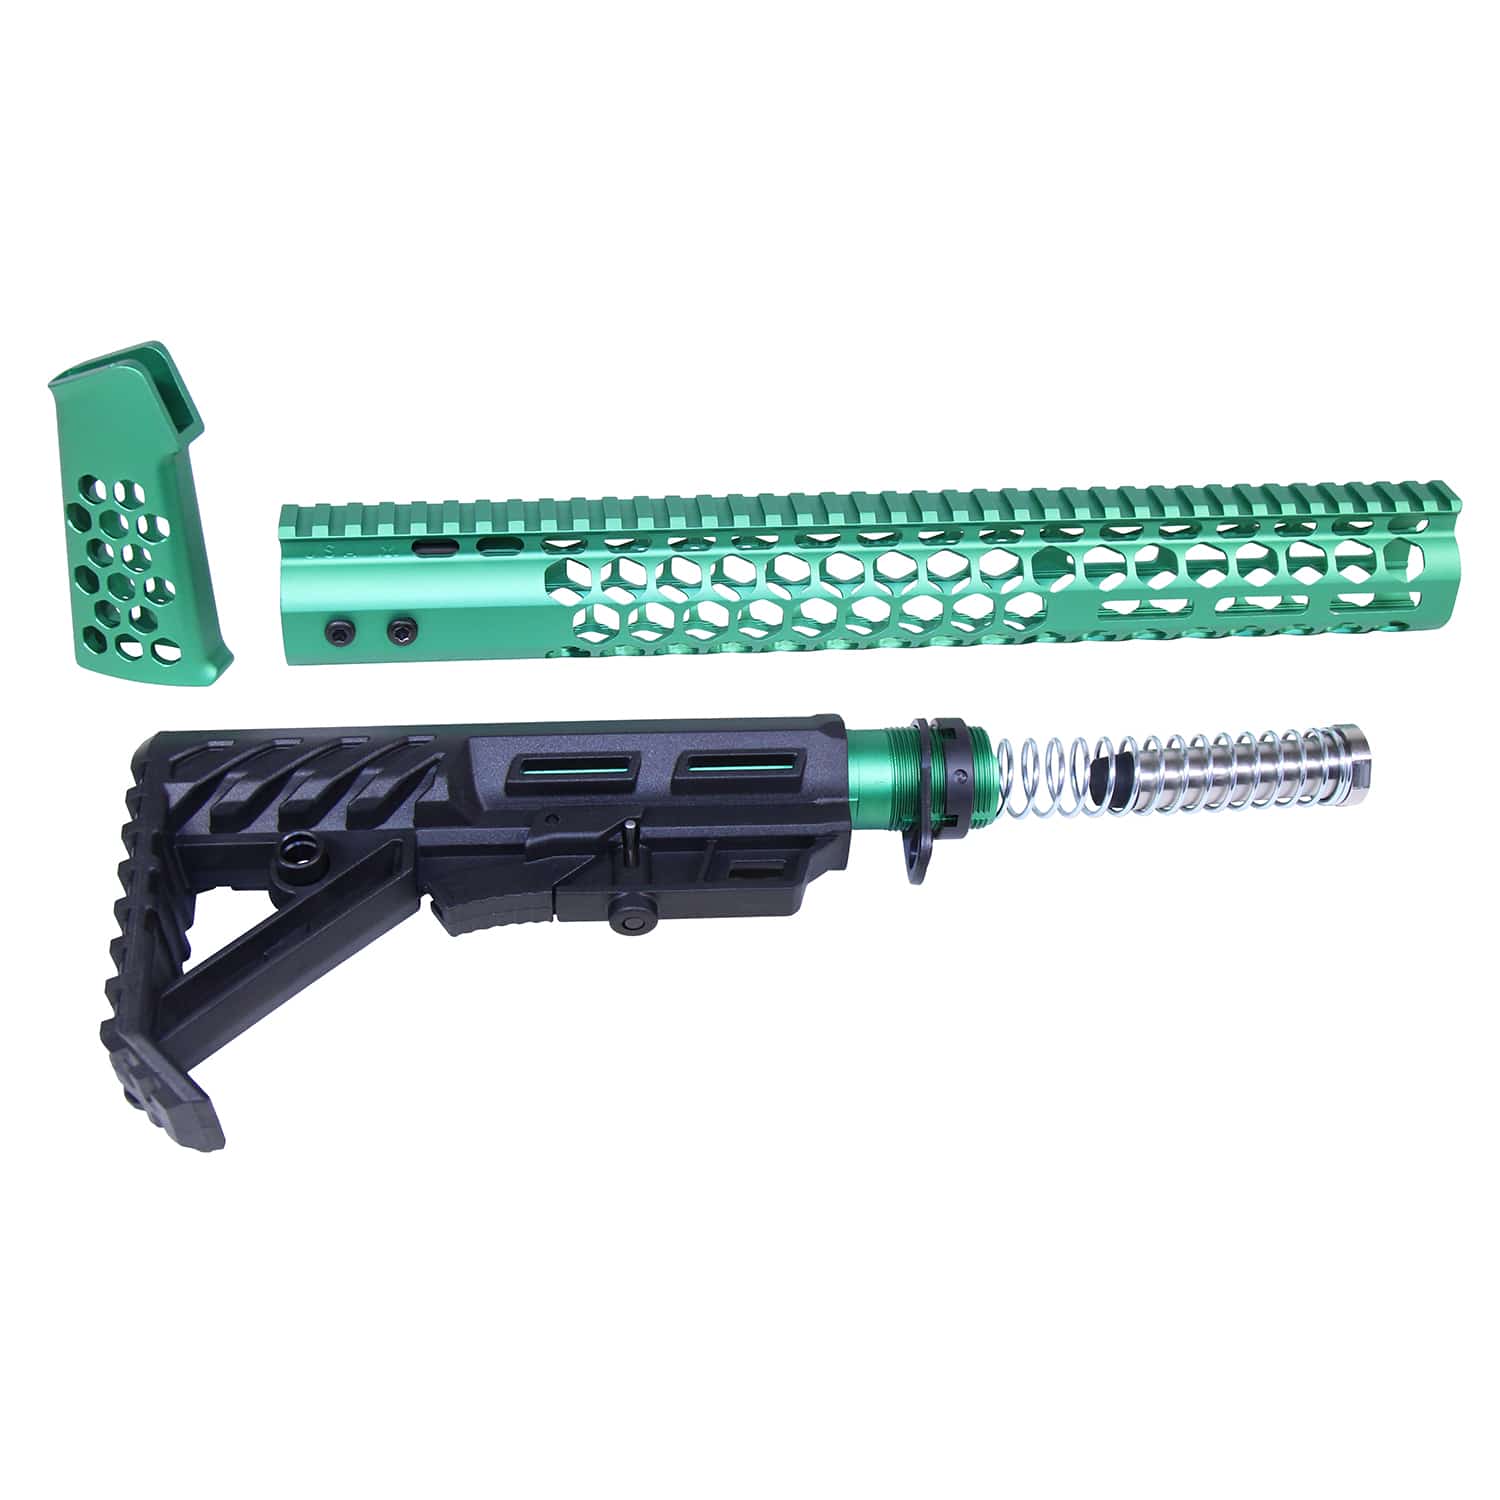 AR-15 Honeycomb Series Complete Rifle Furniture Set in Anodized Irish Green